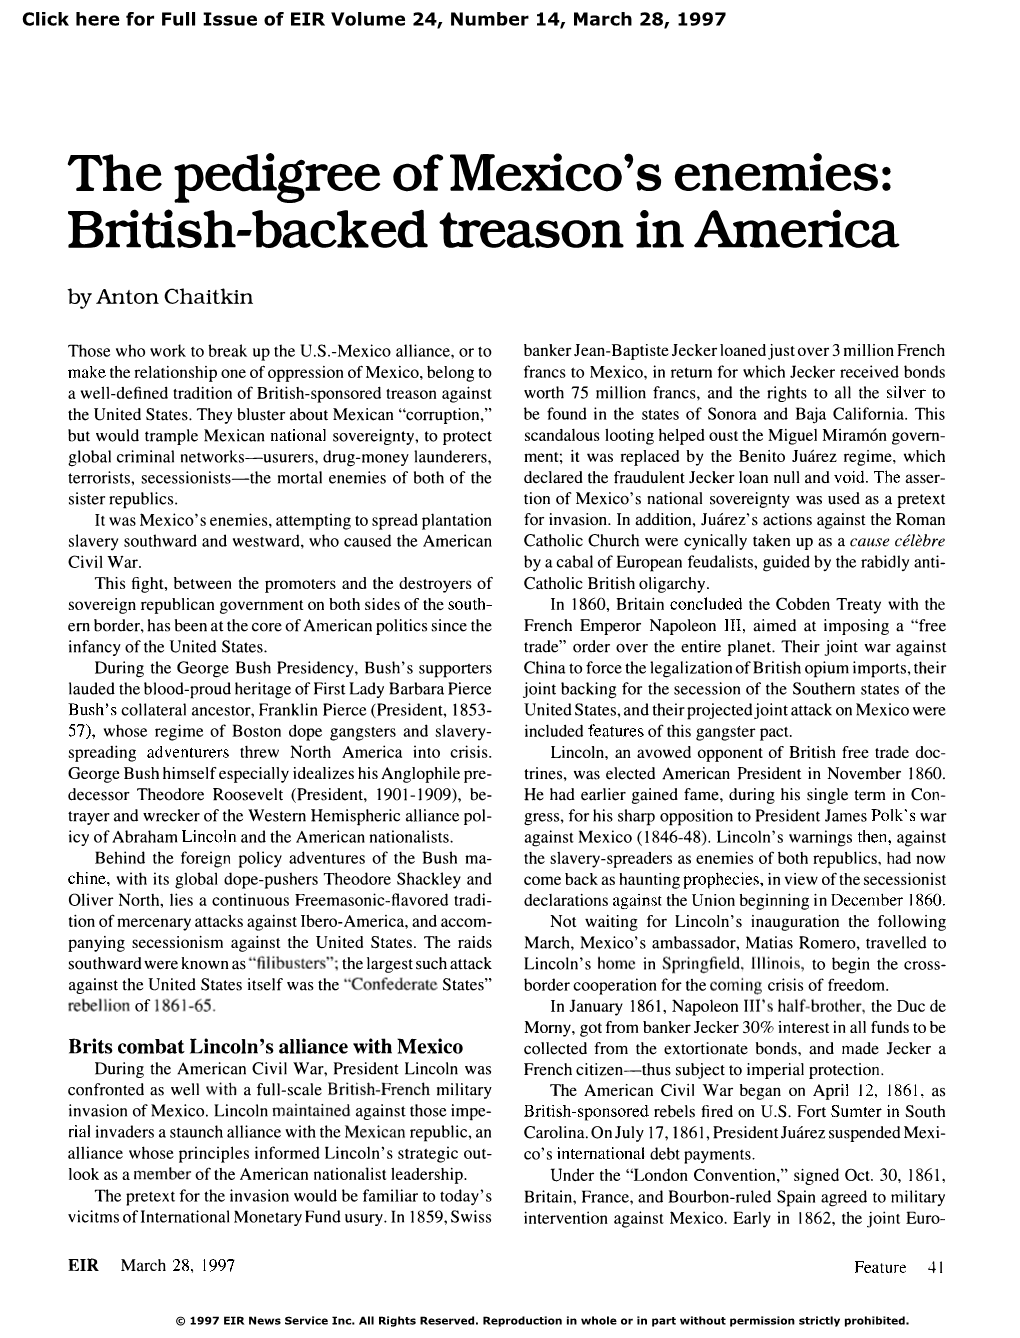 The Pedigree of Mexico's Enemies: British-Backed Treason in America